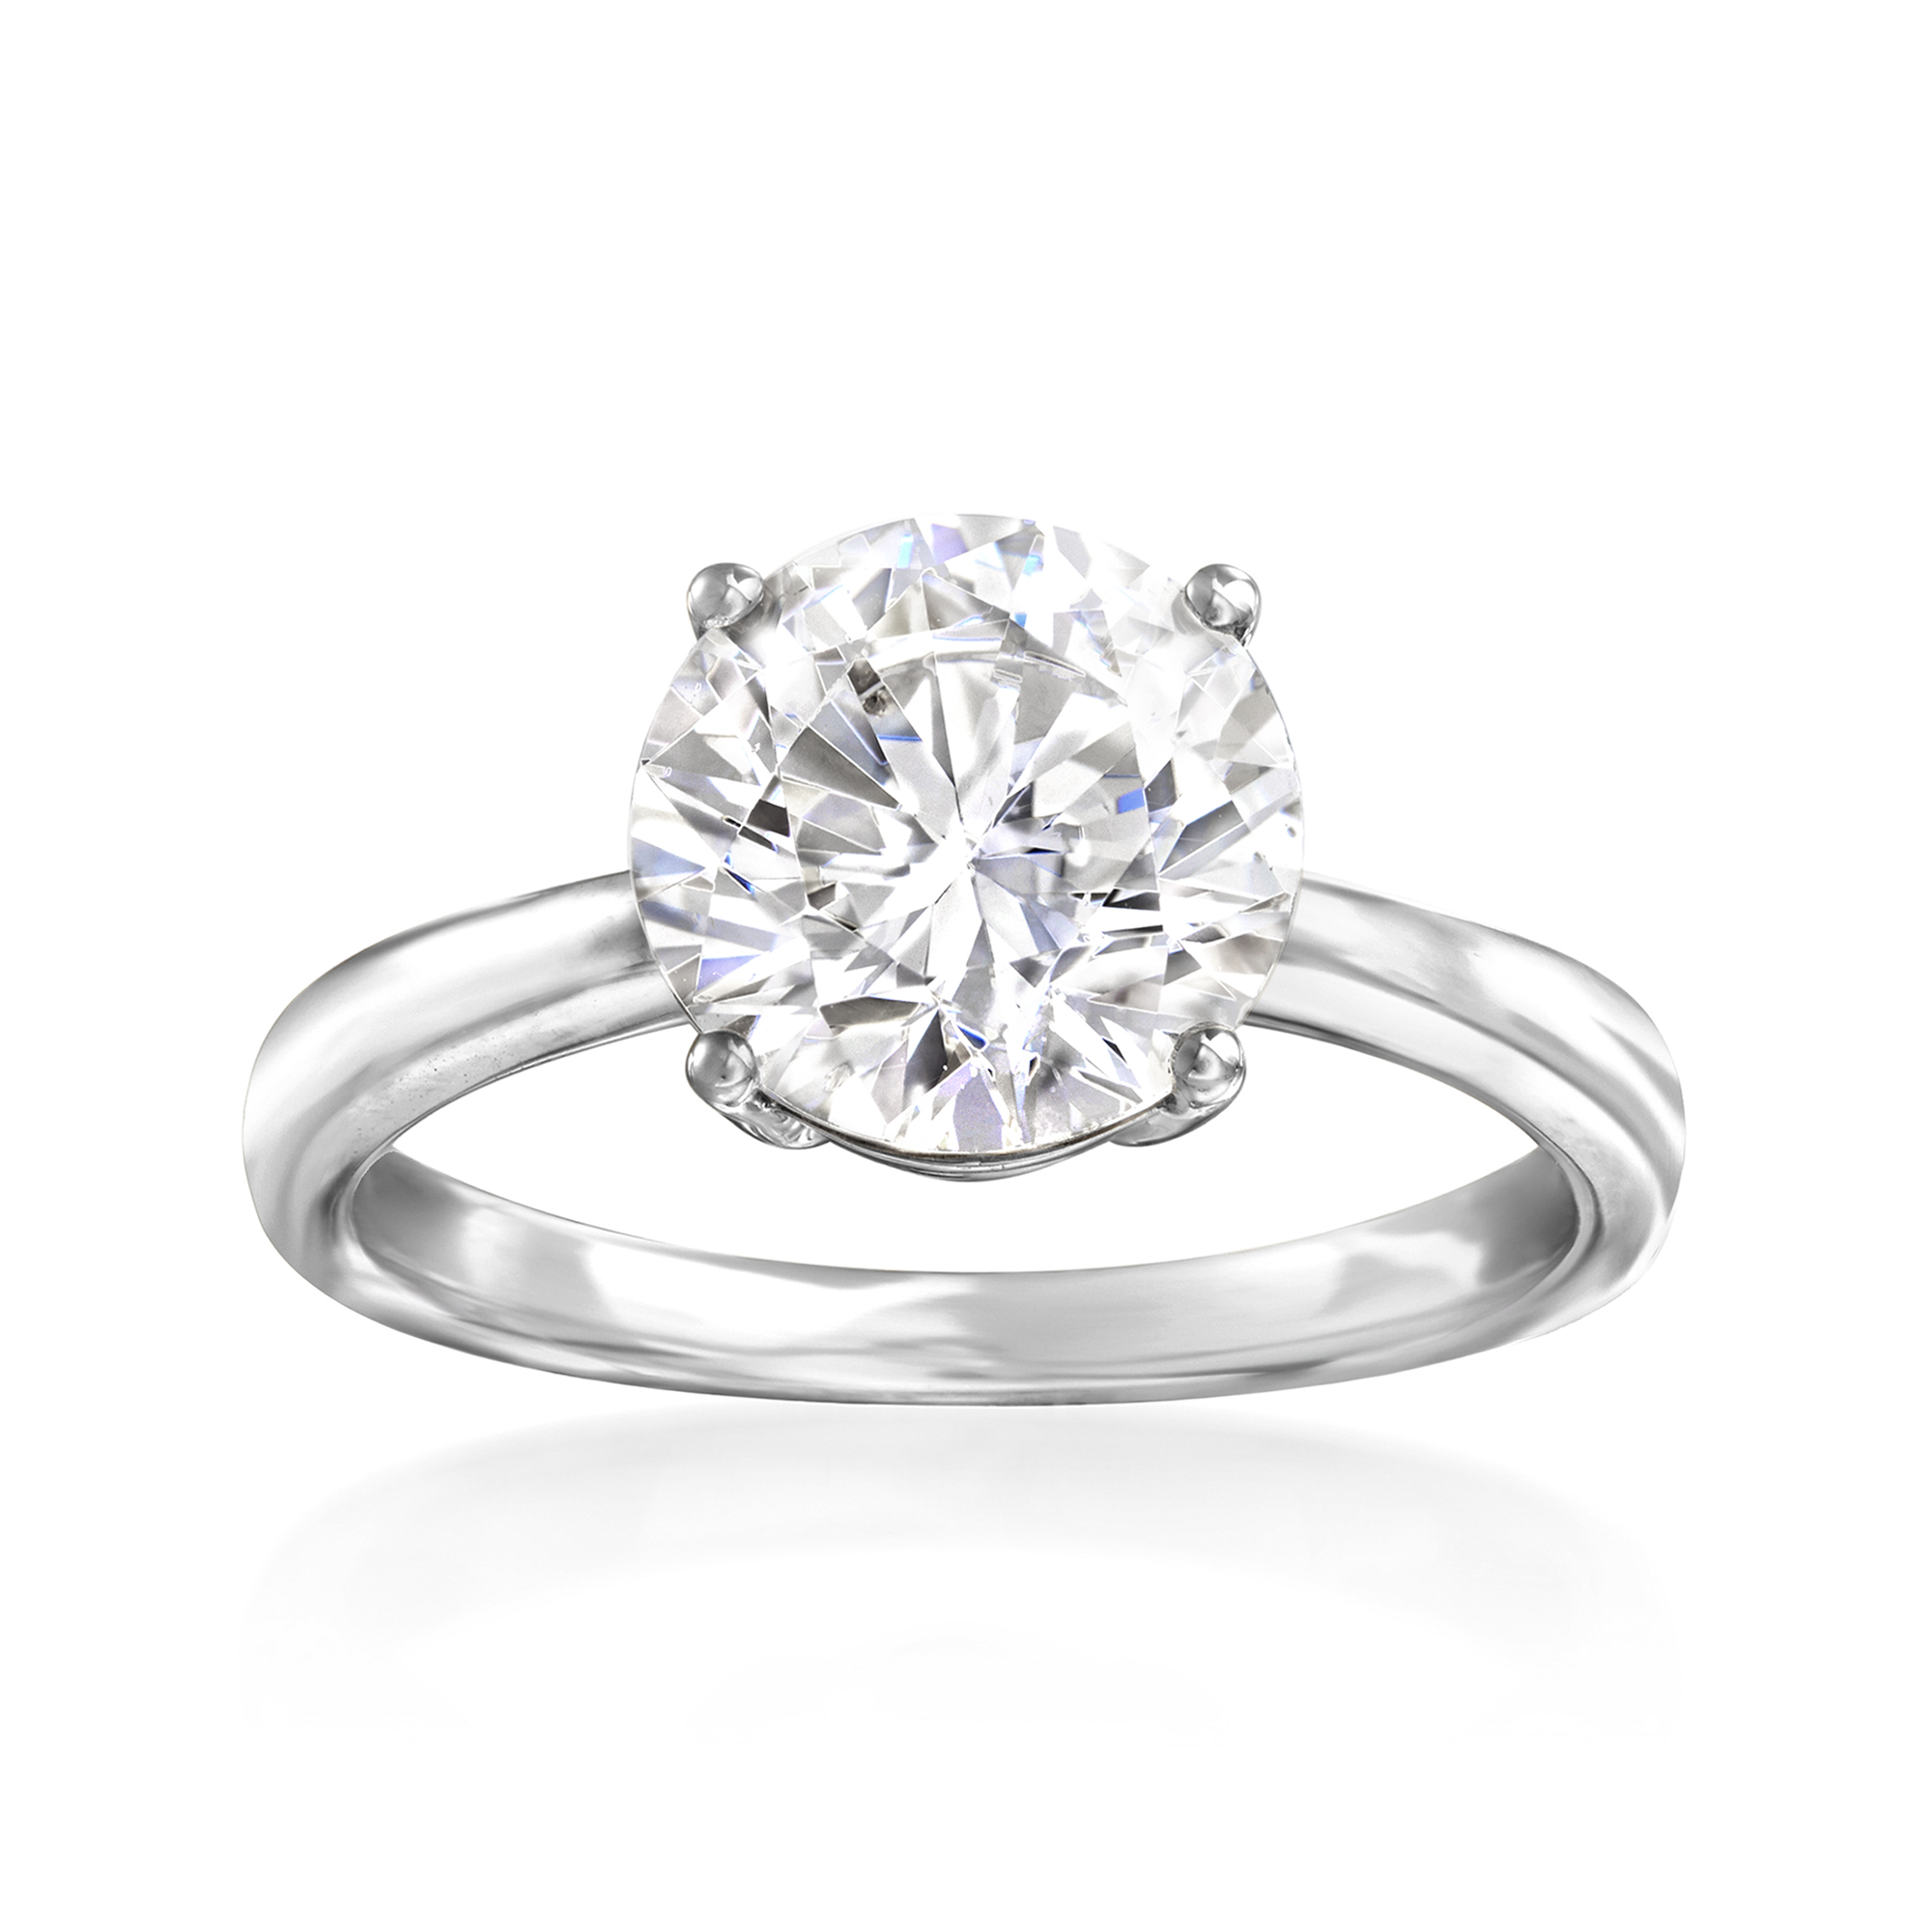 3.00 Carat CZ Solitaire Ring in 14kt White Gold | Ross-Simons